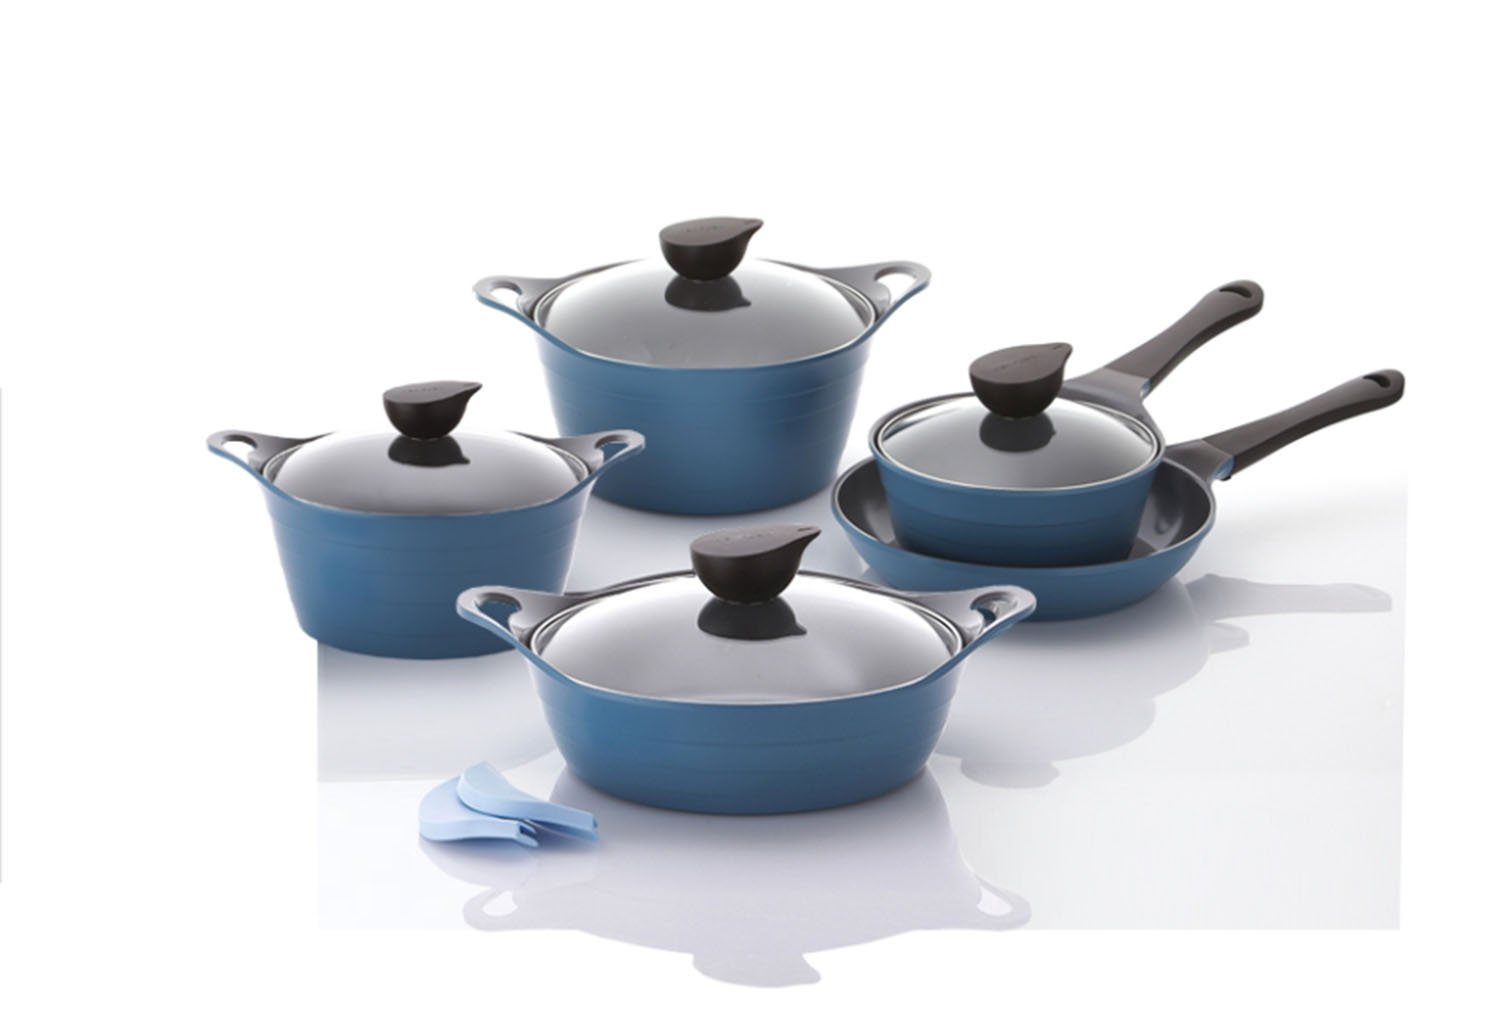 Neoflam Eela Induction Natural mineral Ceramic Ecolon Coating Cast iron ware Cookware Pot Frying Pan 9p Set Blue